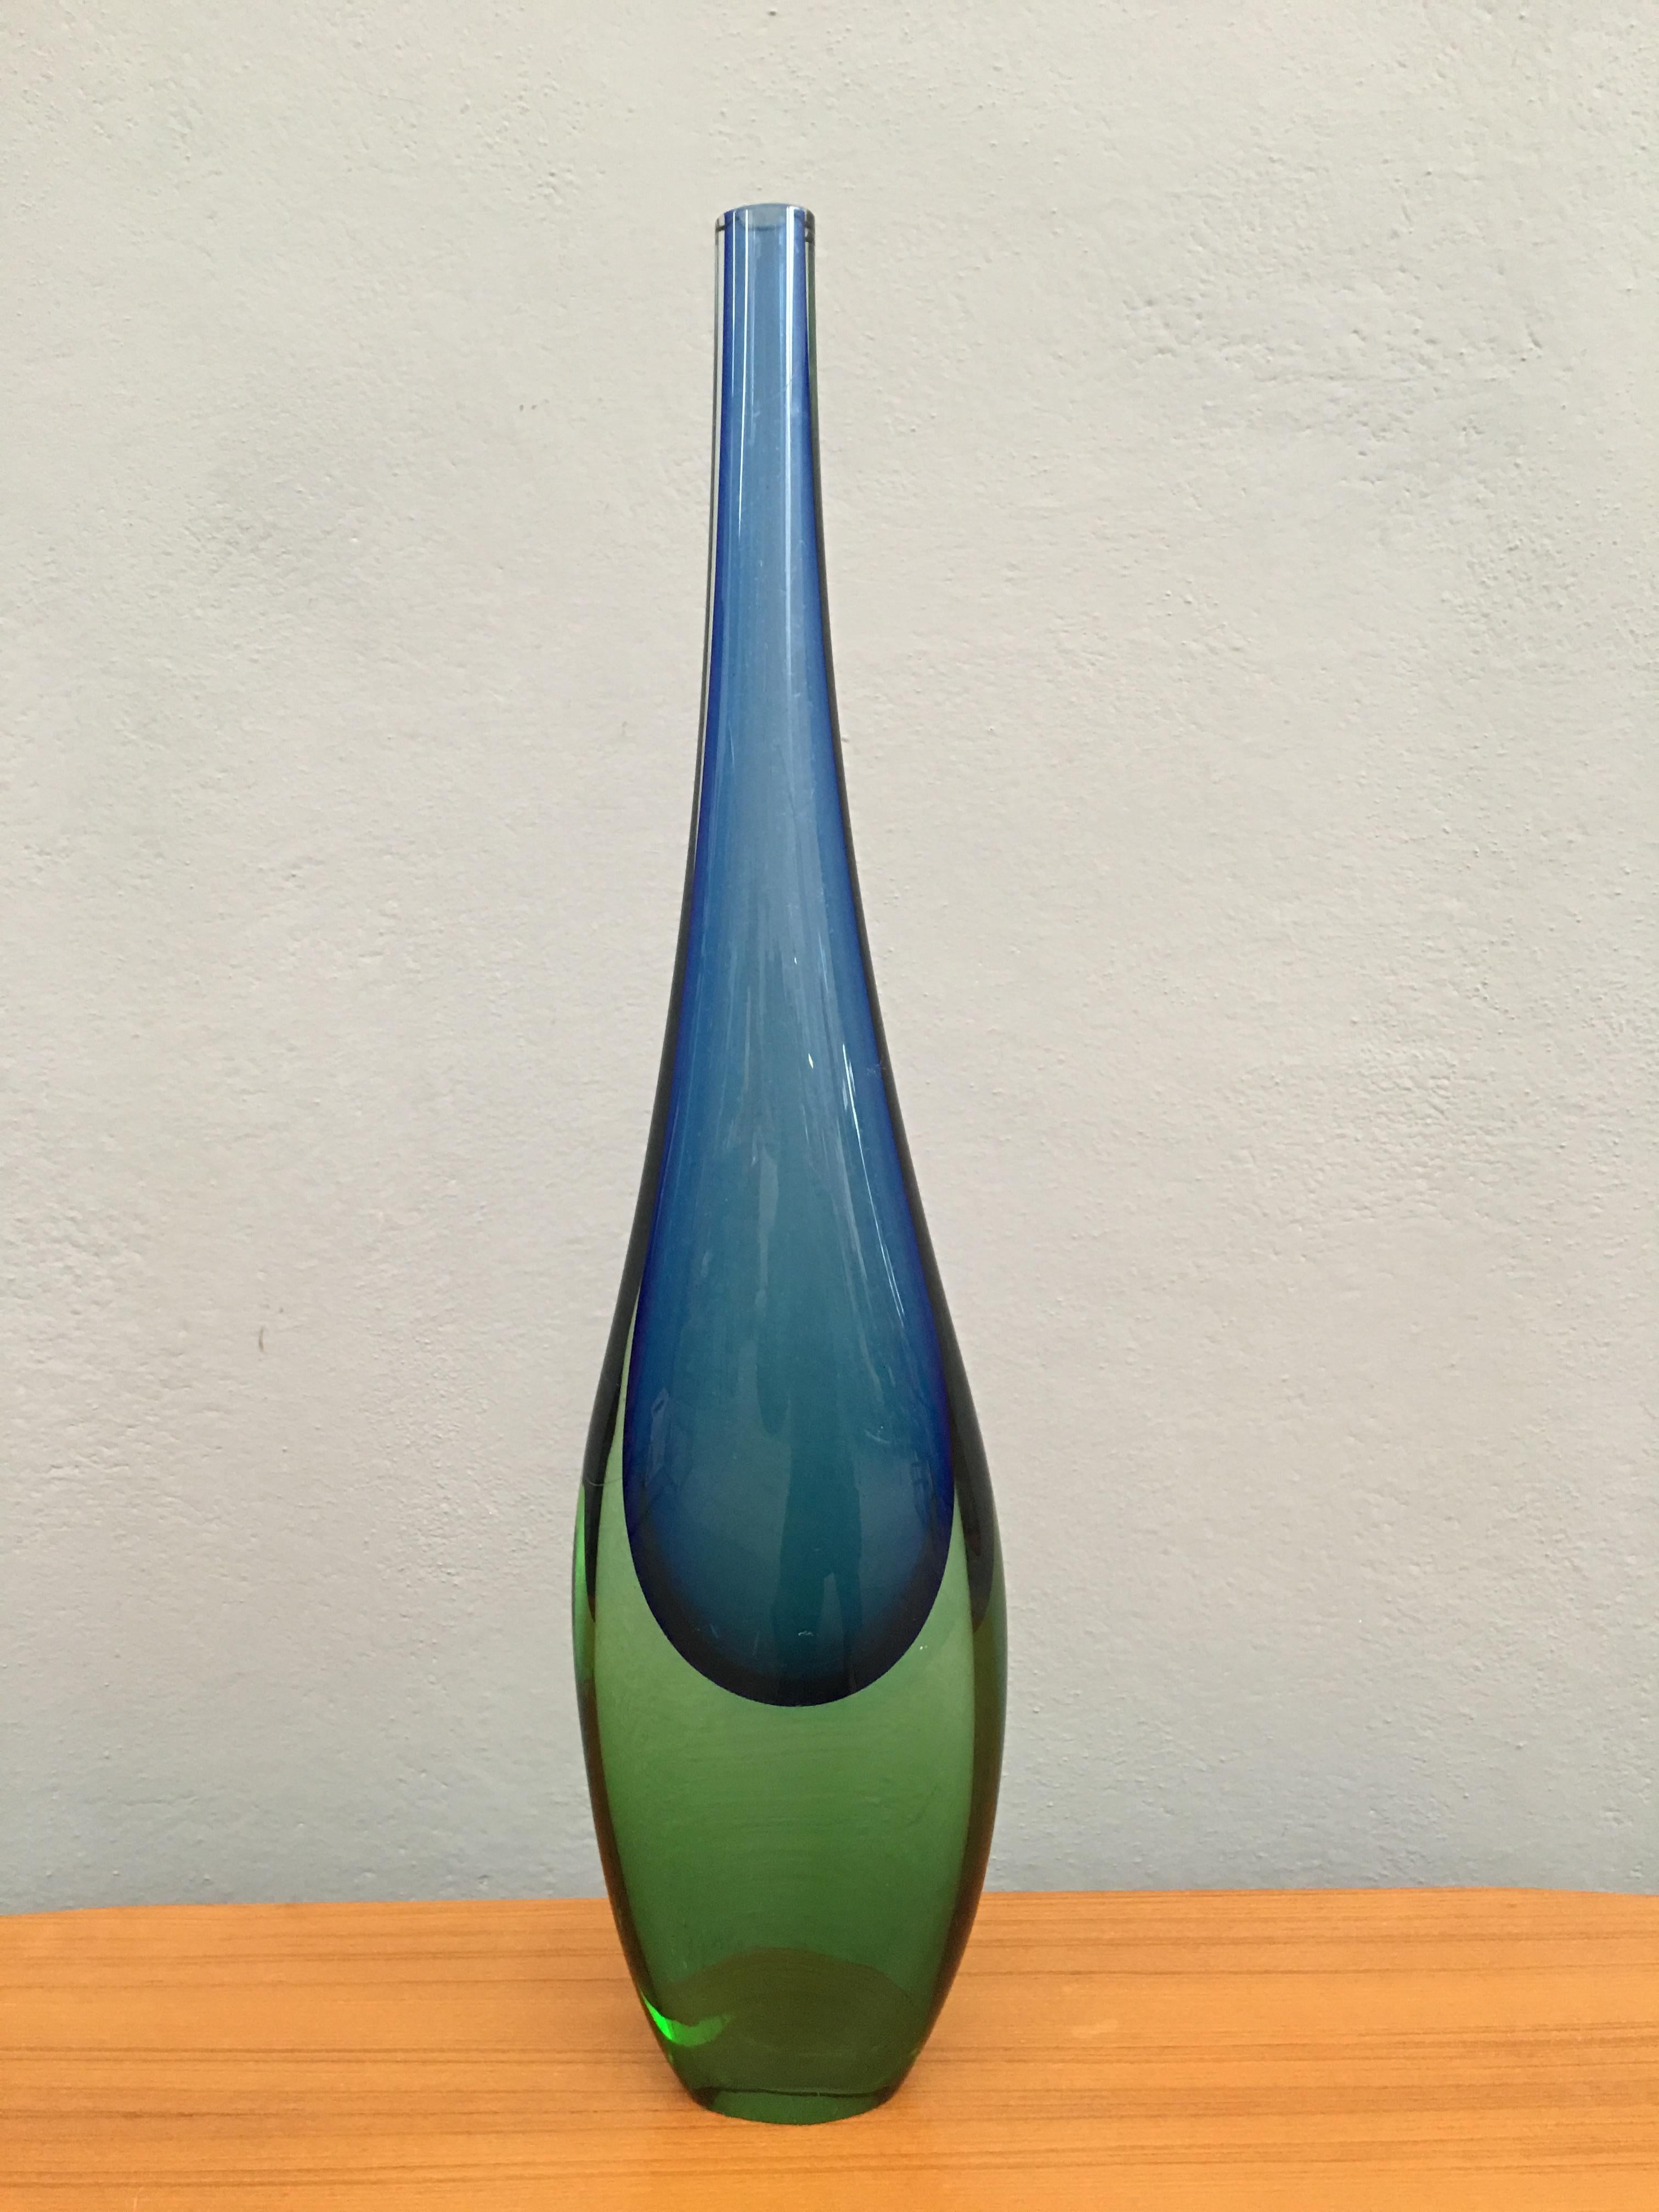 Huge handblown blue and green Murano glass Sommerso vase attributed to Flavio Poli for Seguso.
Charming shape and unusual measures.